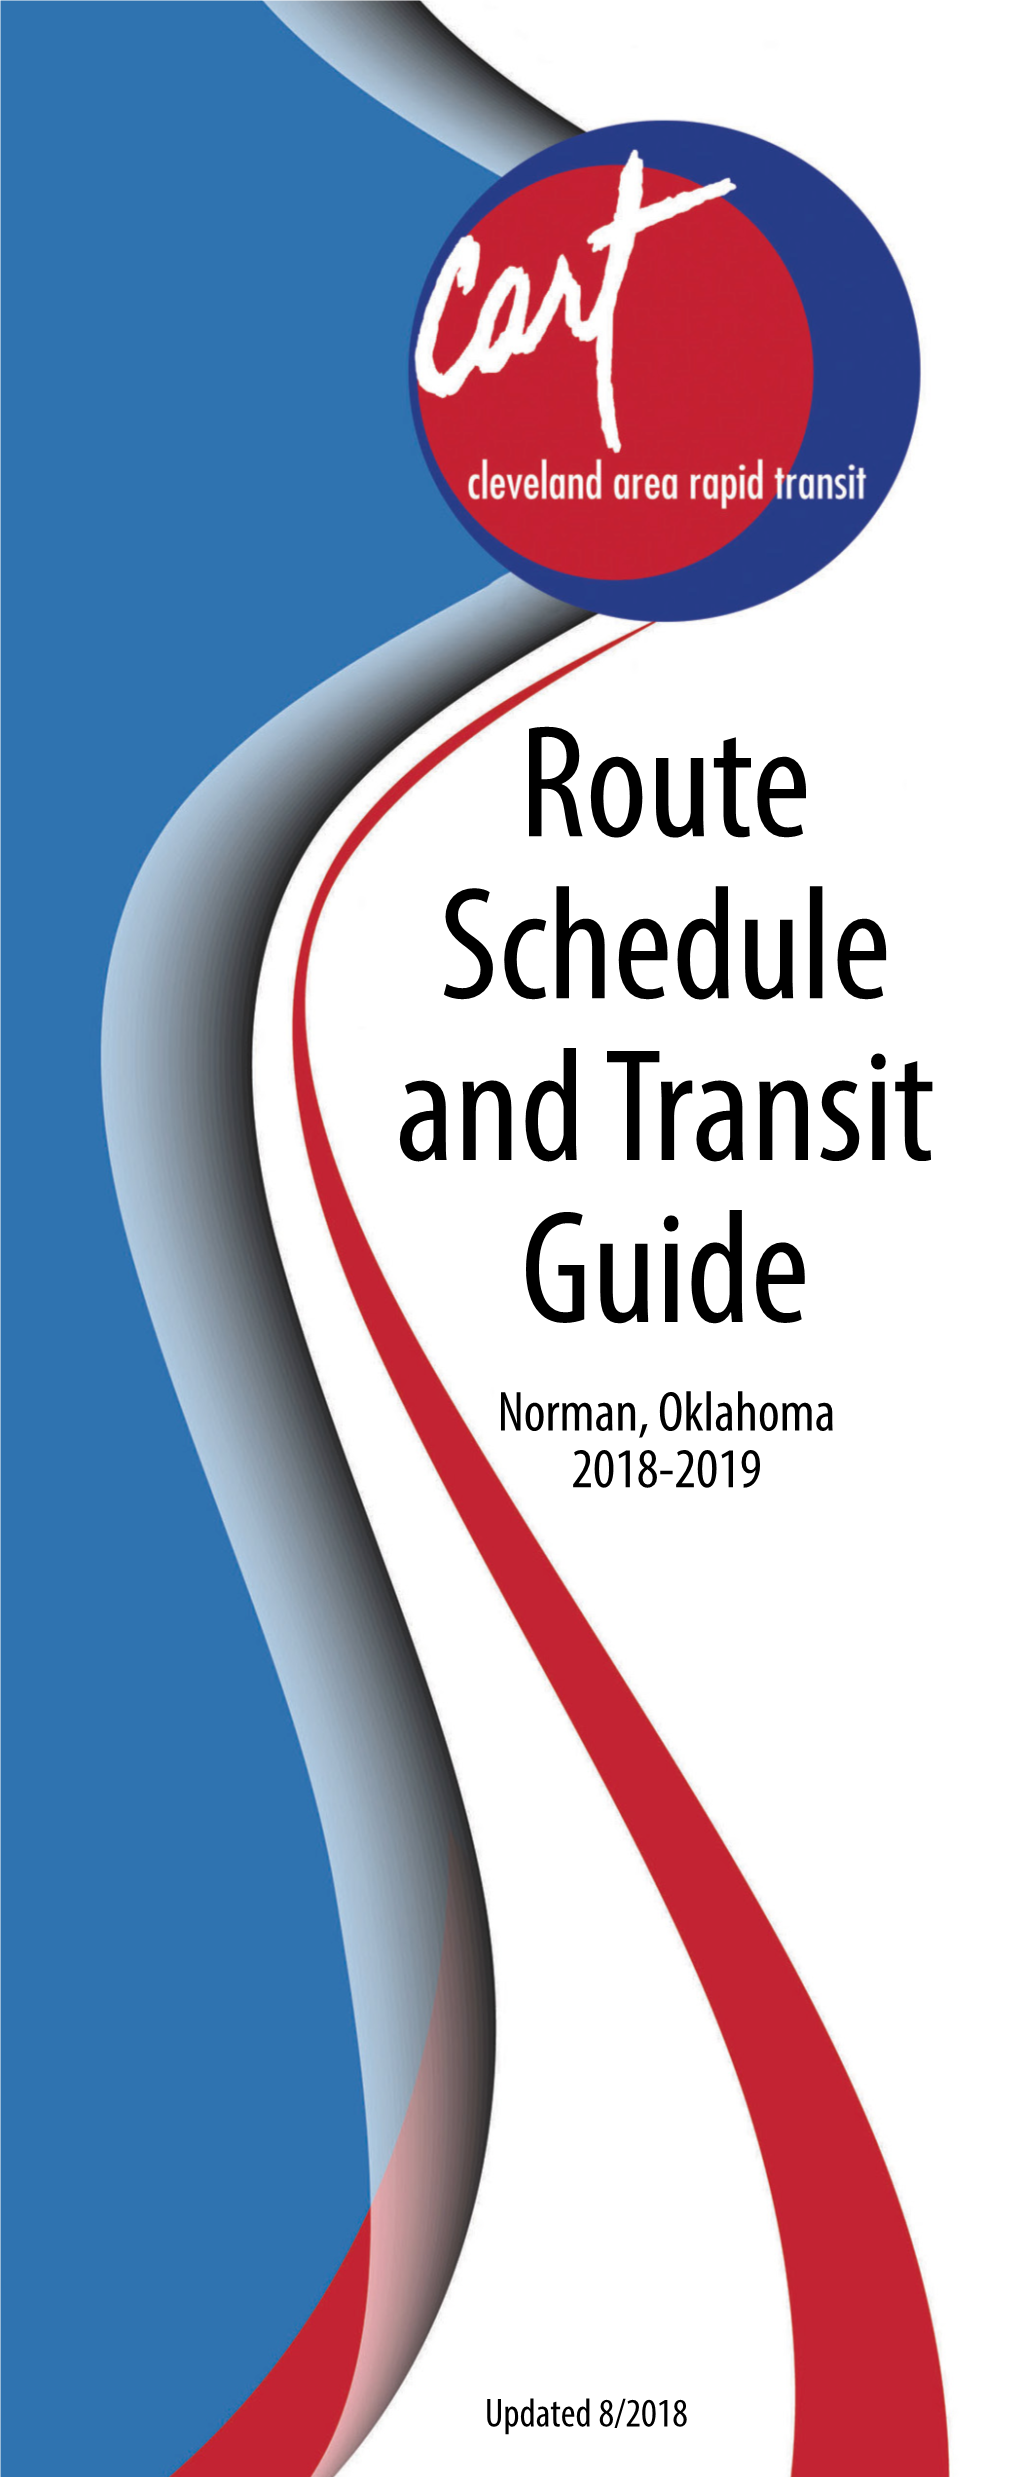 Route Schedule and Transit Guide Norman, Oklahoma 2018-2019